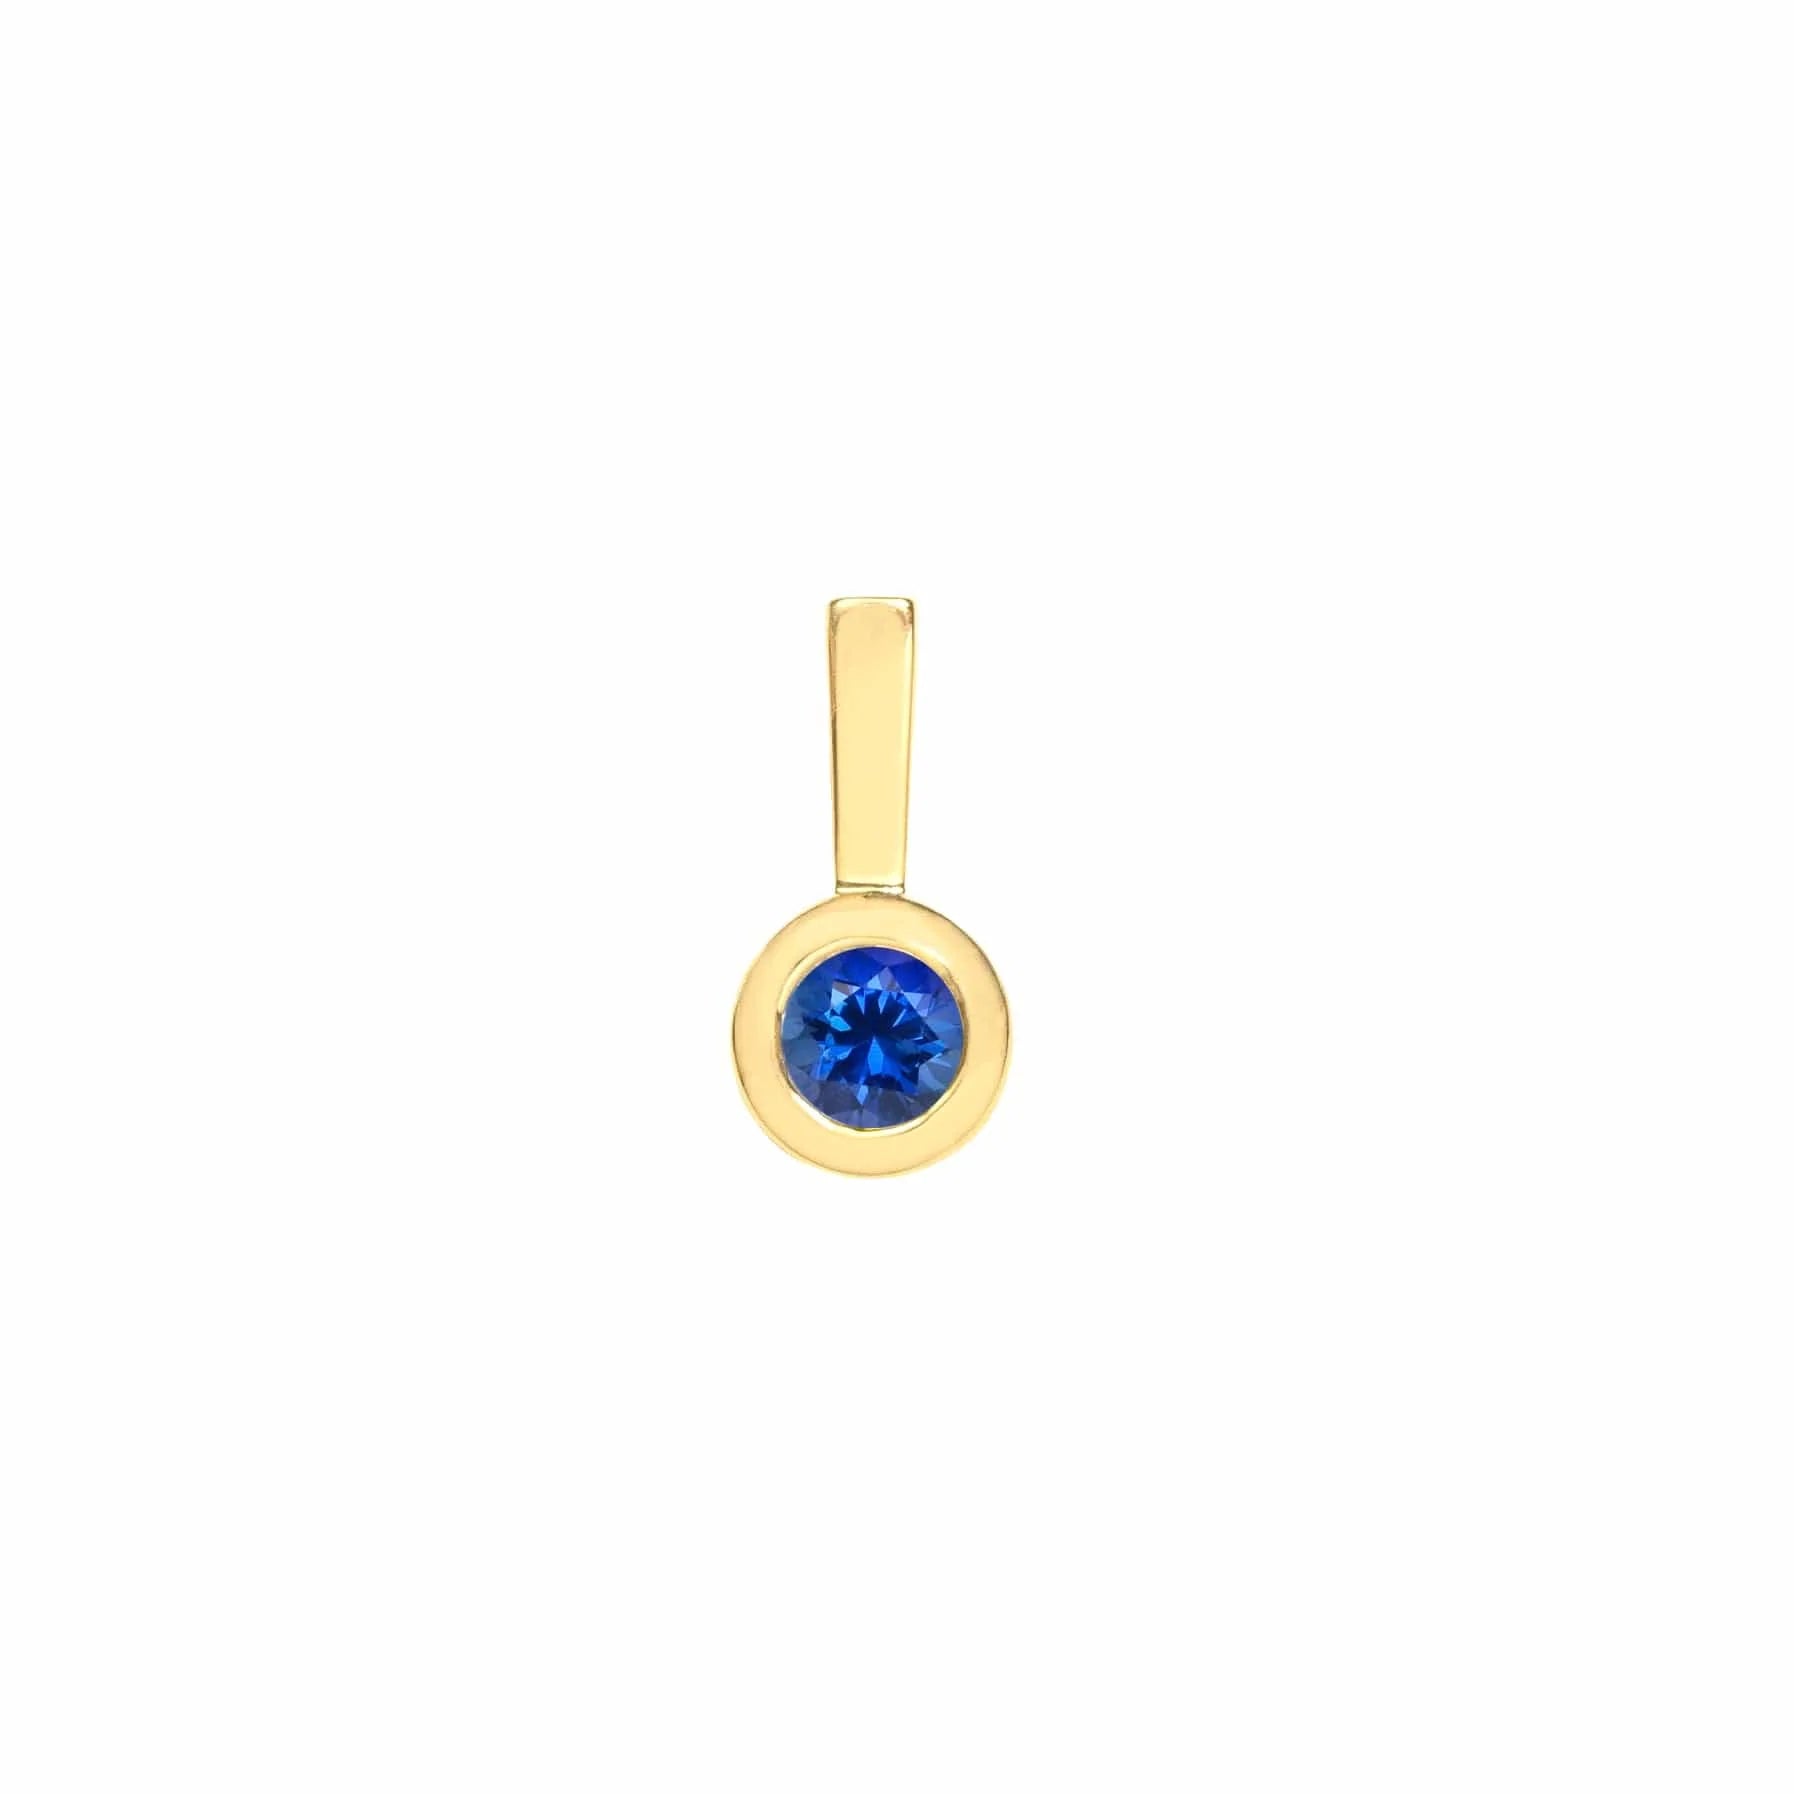 MICHAEL M Necklaces 14K Yellow Gold / Sapphire - September Deco Birthstone Charm P404SA